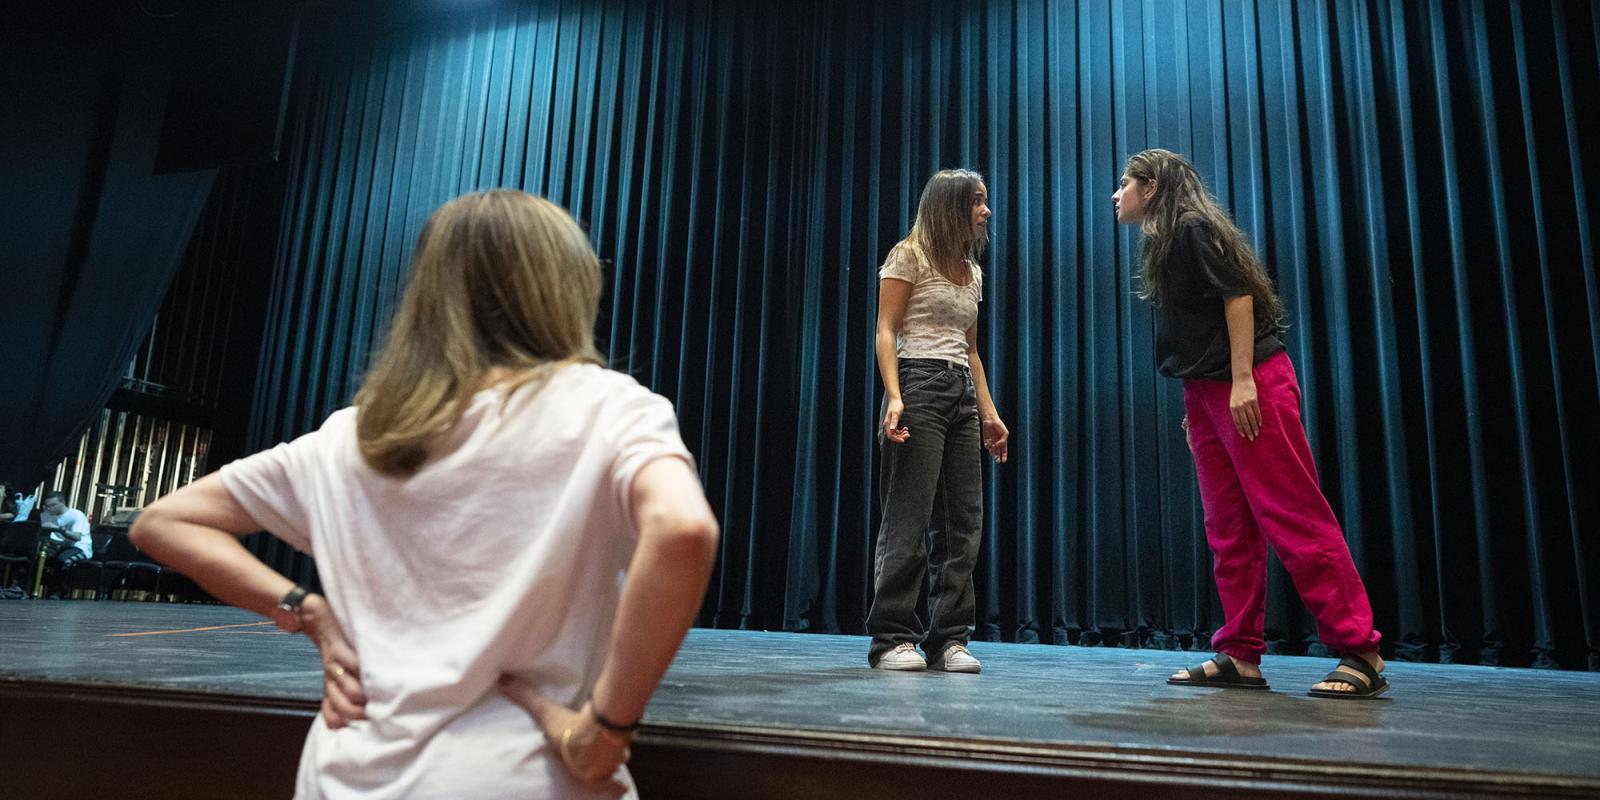 Instructor watching two female students acting on stage